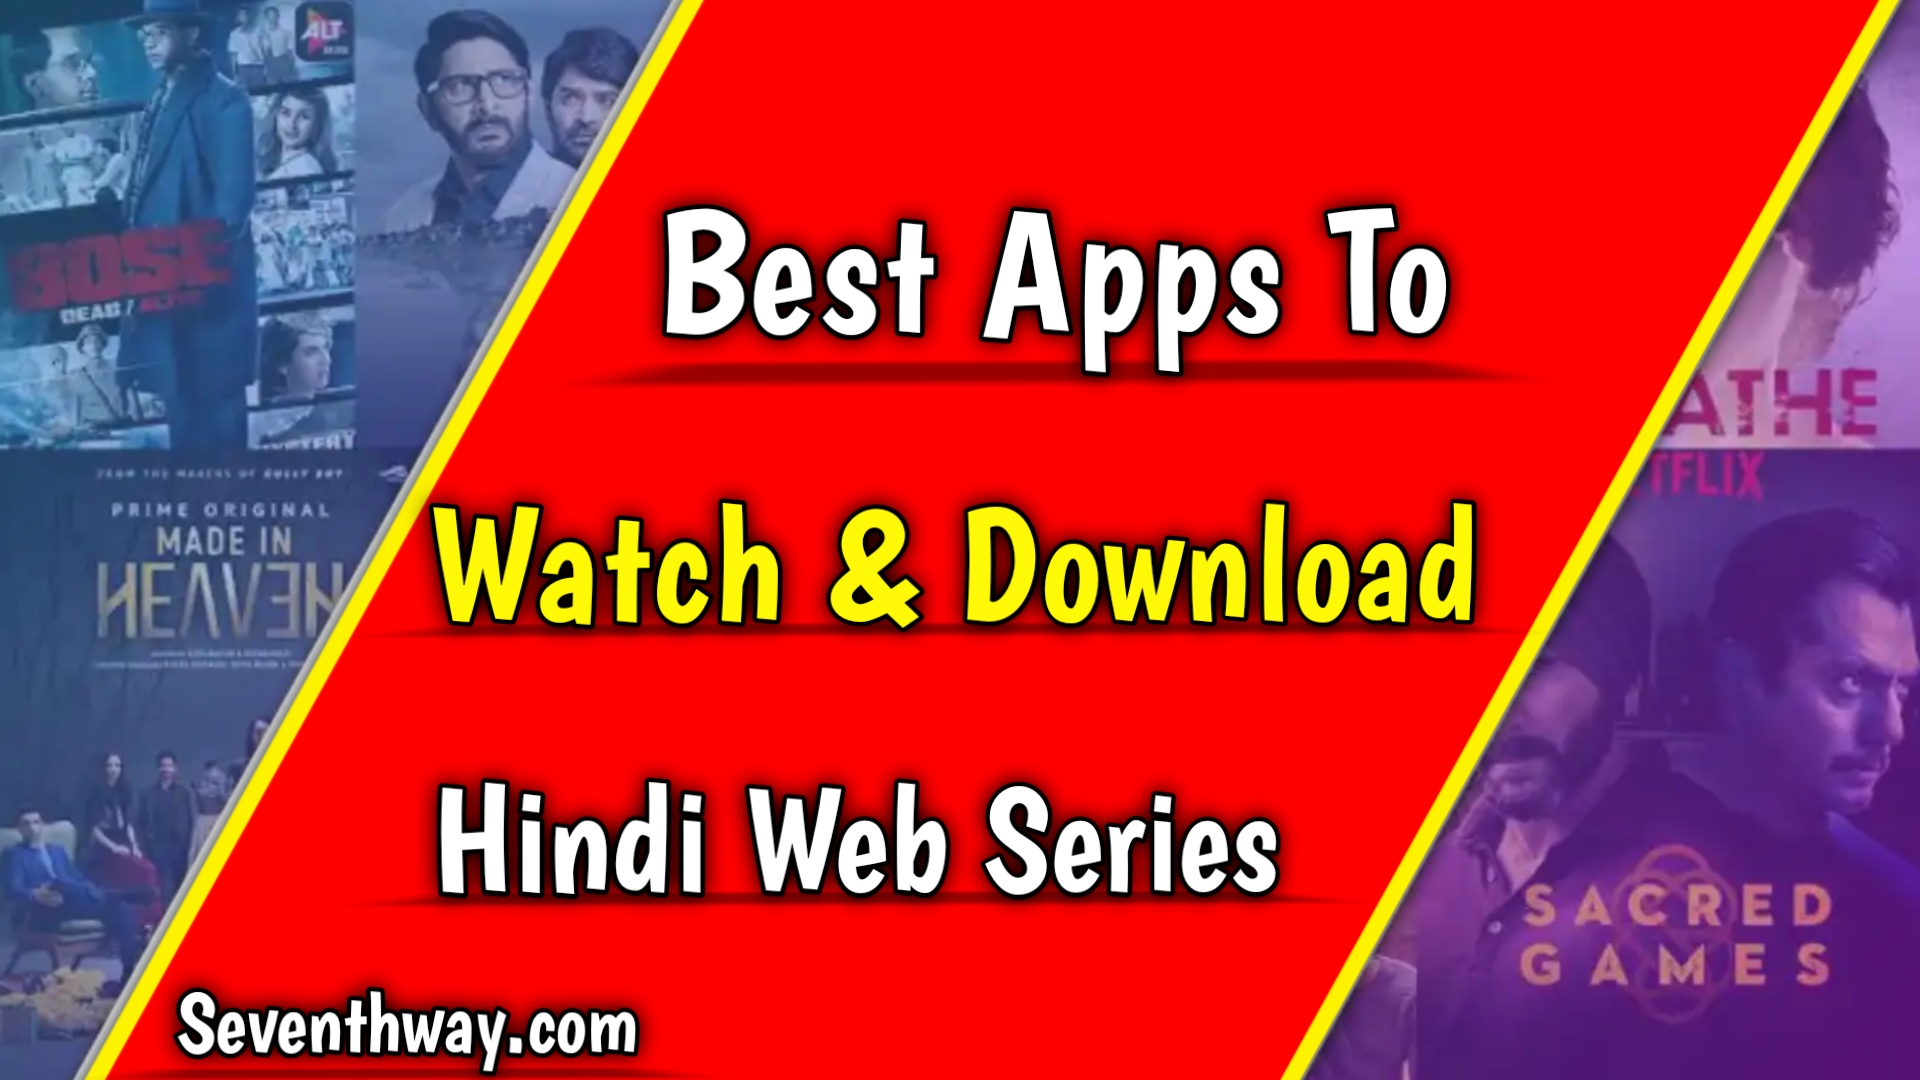 Best apps to watch and Download Hindi web series